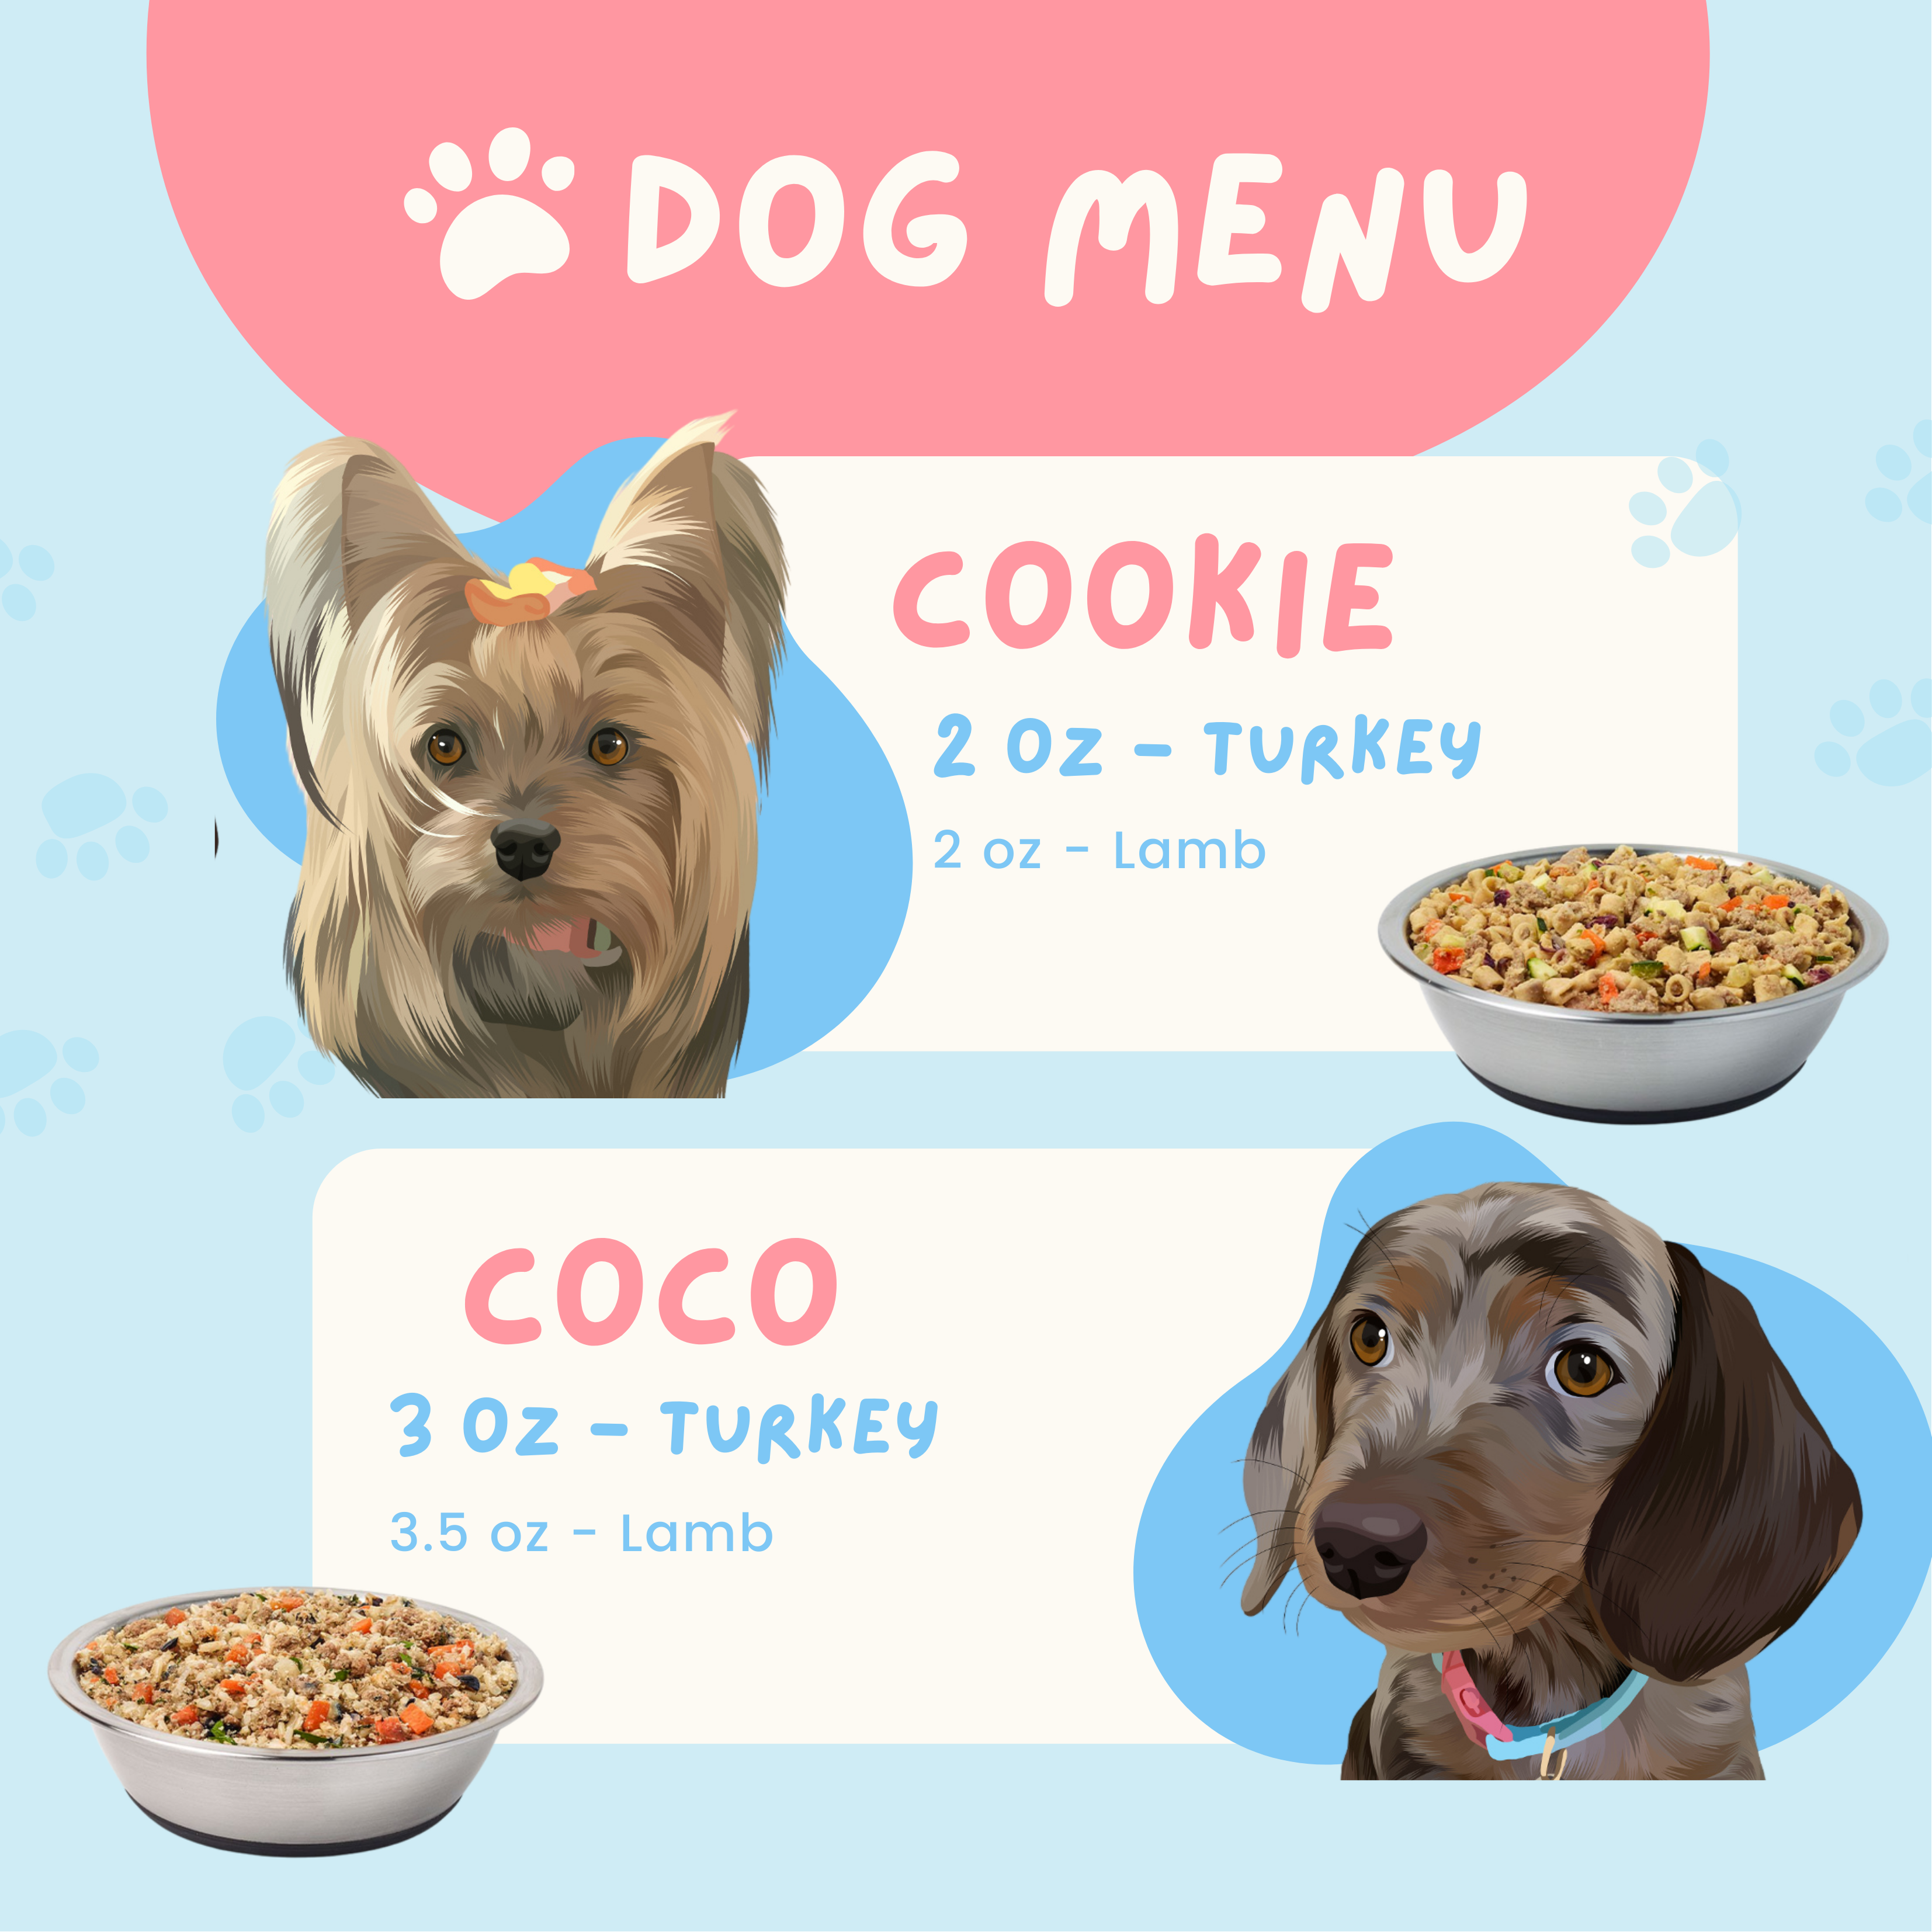  Image of Dog Menu with two dogs and their ammount of food for each